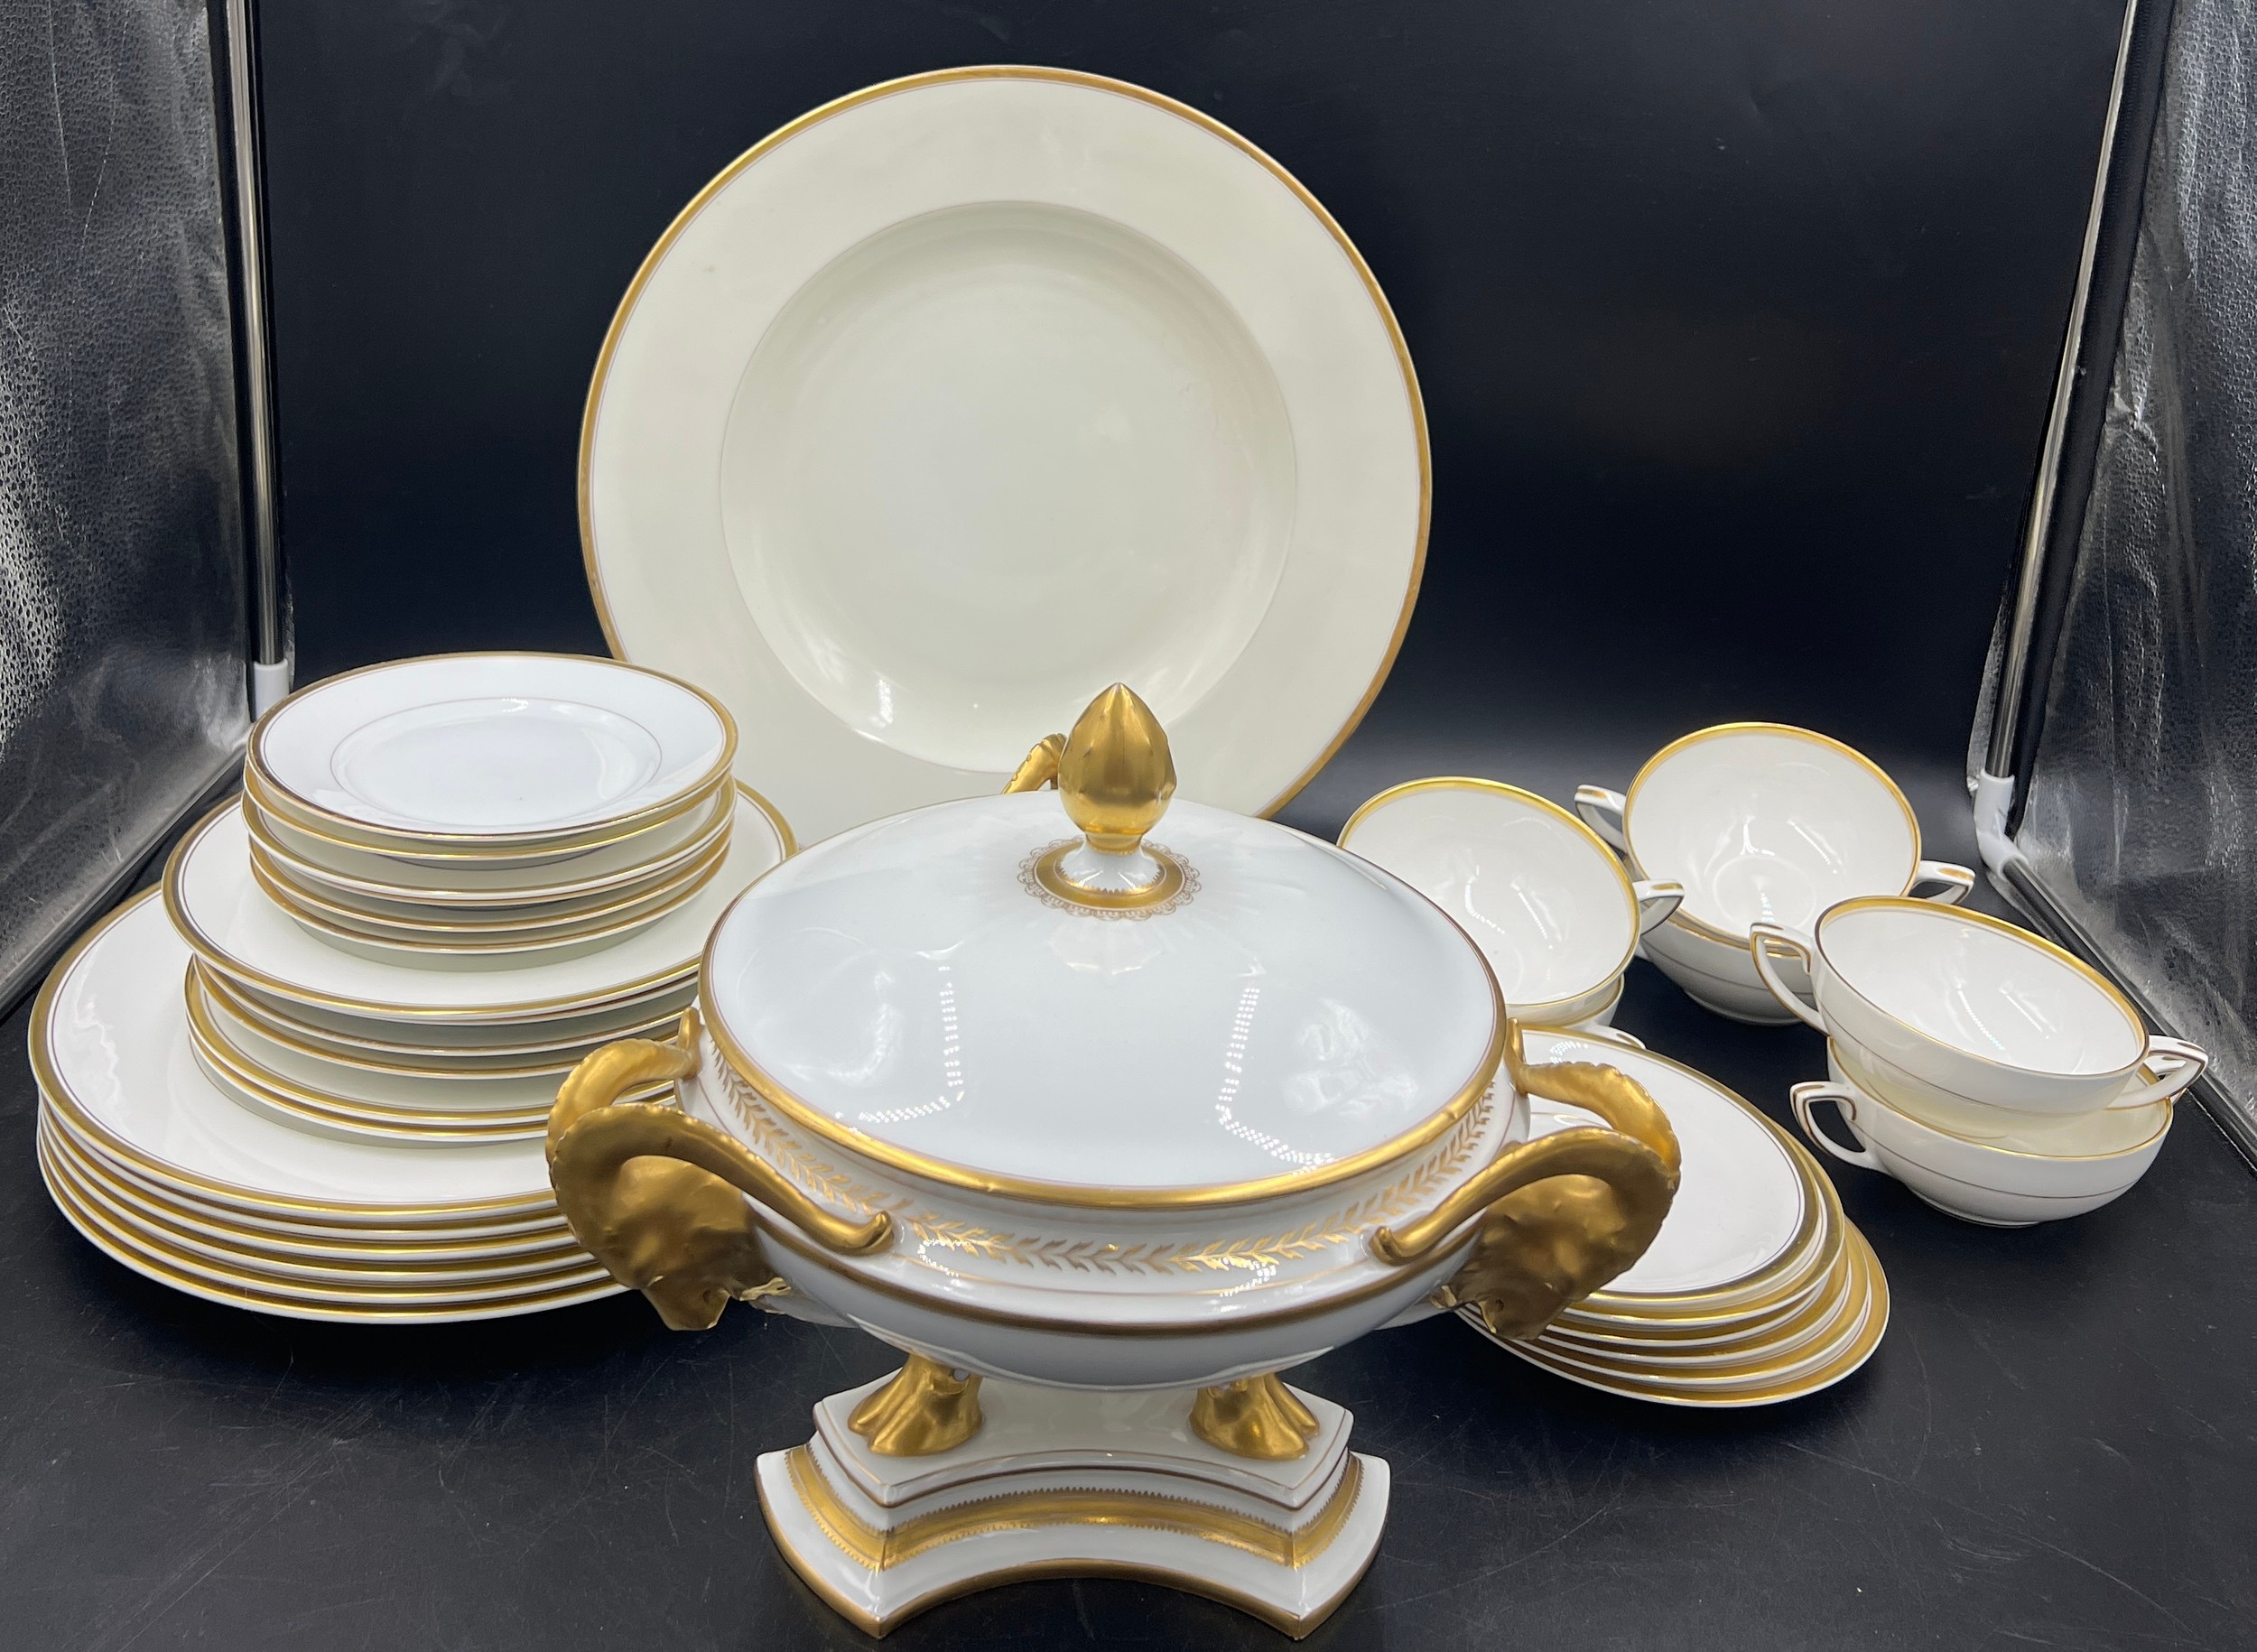 A composite set of white and gilt dinner service to include 6 Royal Worcester Viceroy bowls and